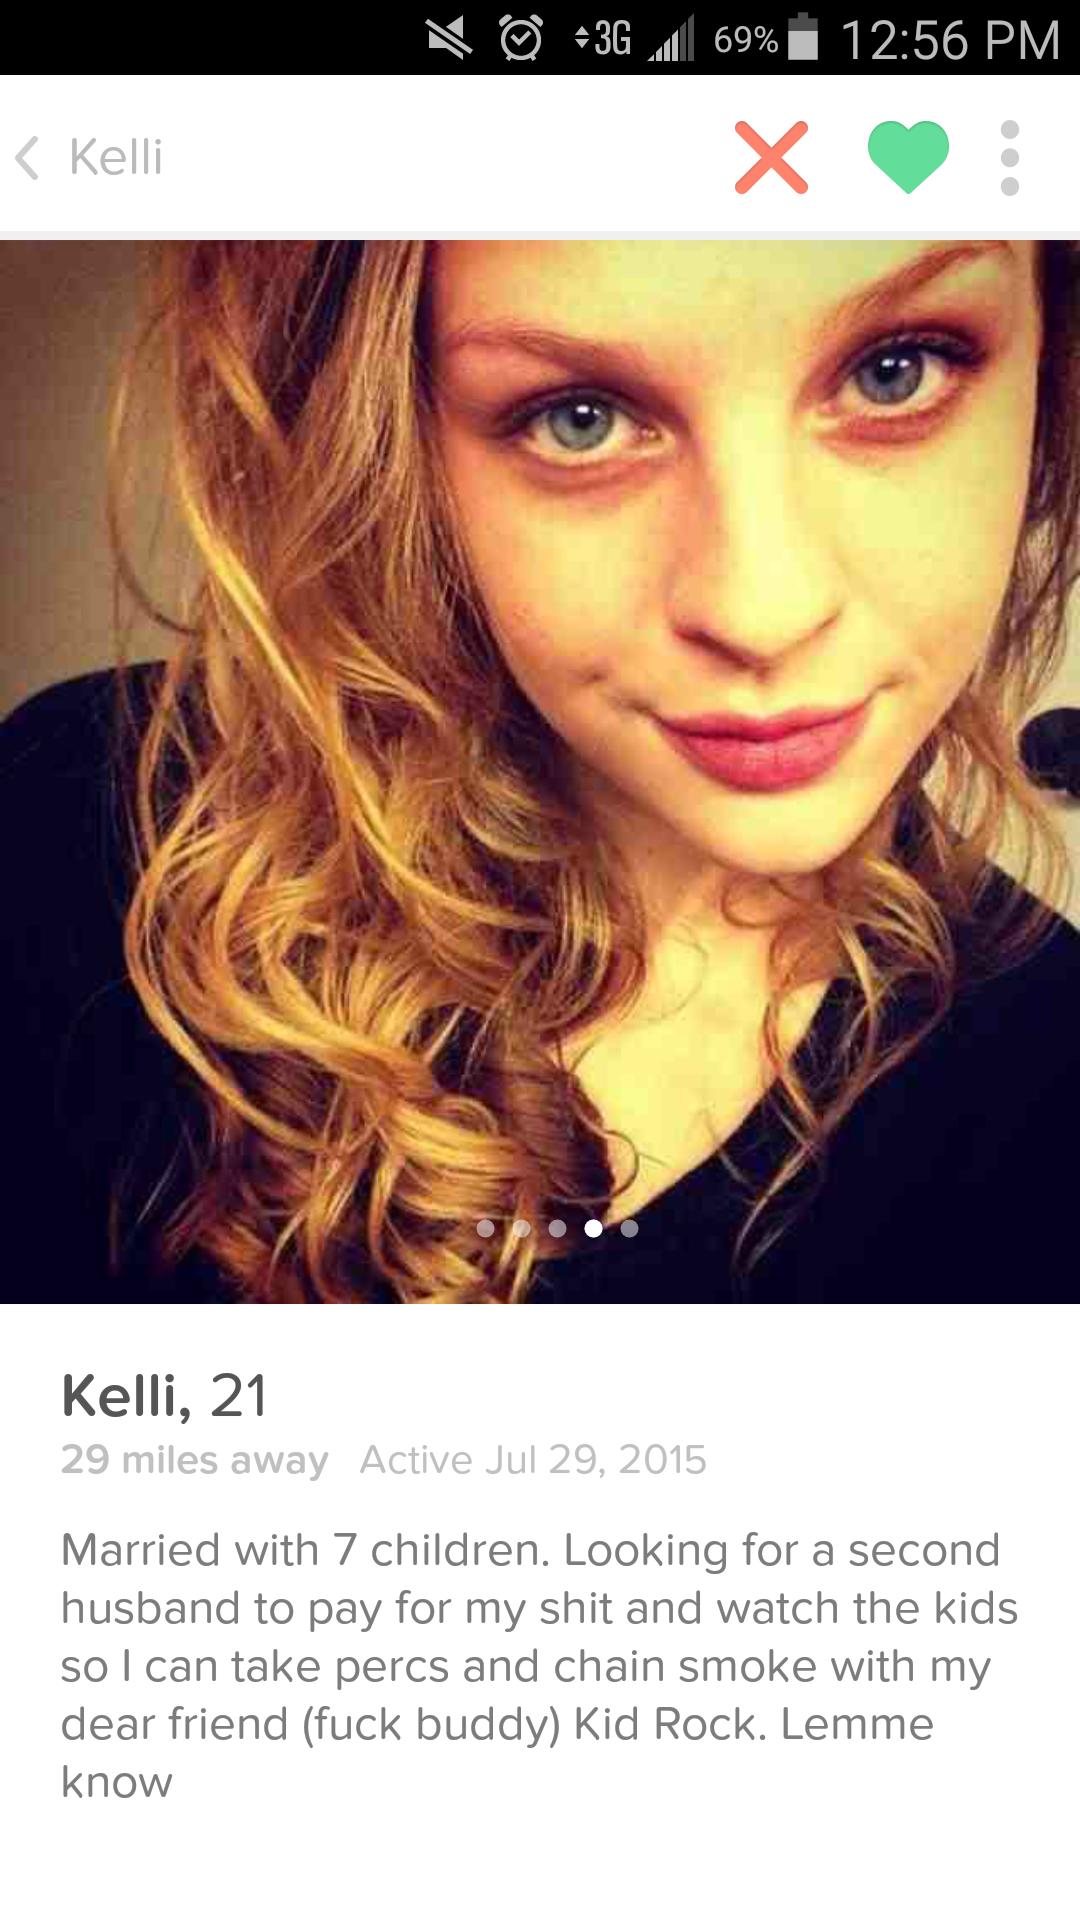 weird people on tinder - 3G. | 69% Kelli X Kelli, 21 29 miles away Active Married with 7 children. Looking for a second husband to pay for my shit and watch the kids so I can take percs and chain smoke with my dear friend fuck buddy Kid Rock. Lemme know